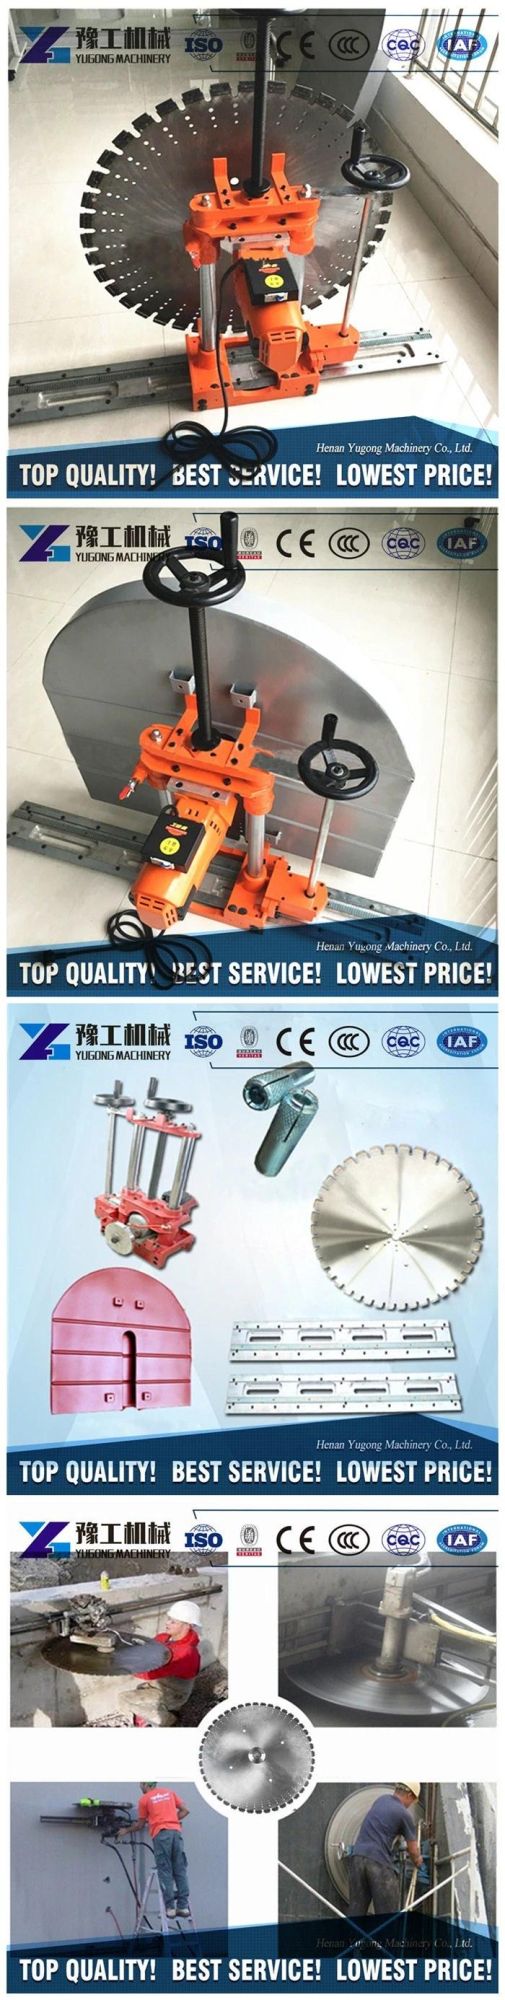 Hydraulic&Electric Reinforced Concrete Wall Saw Machine for Sale